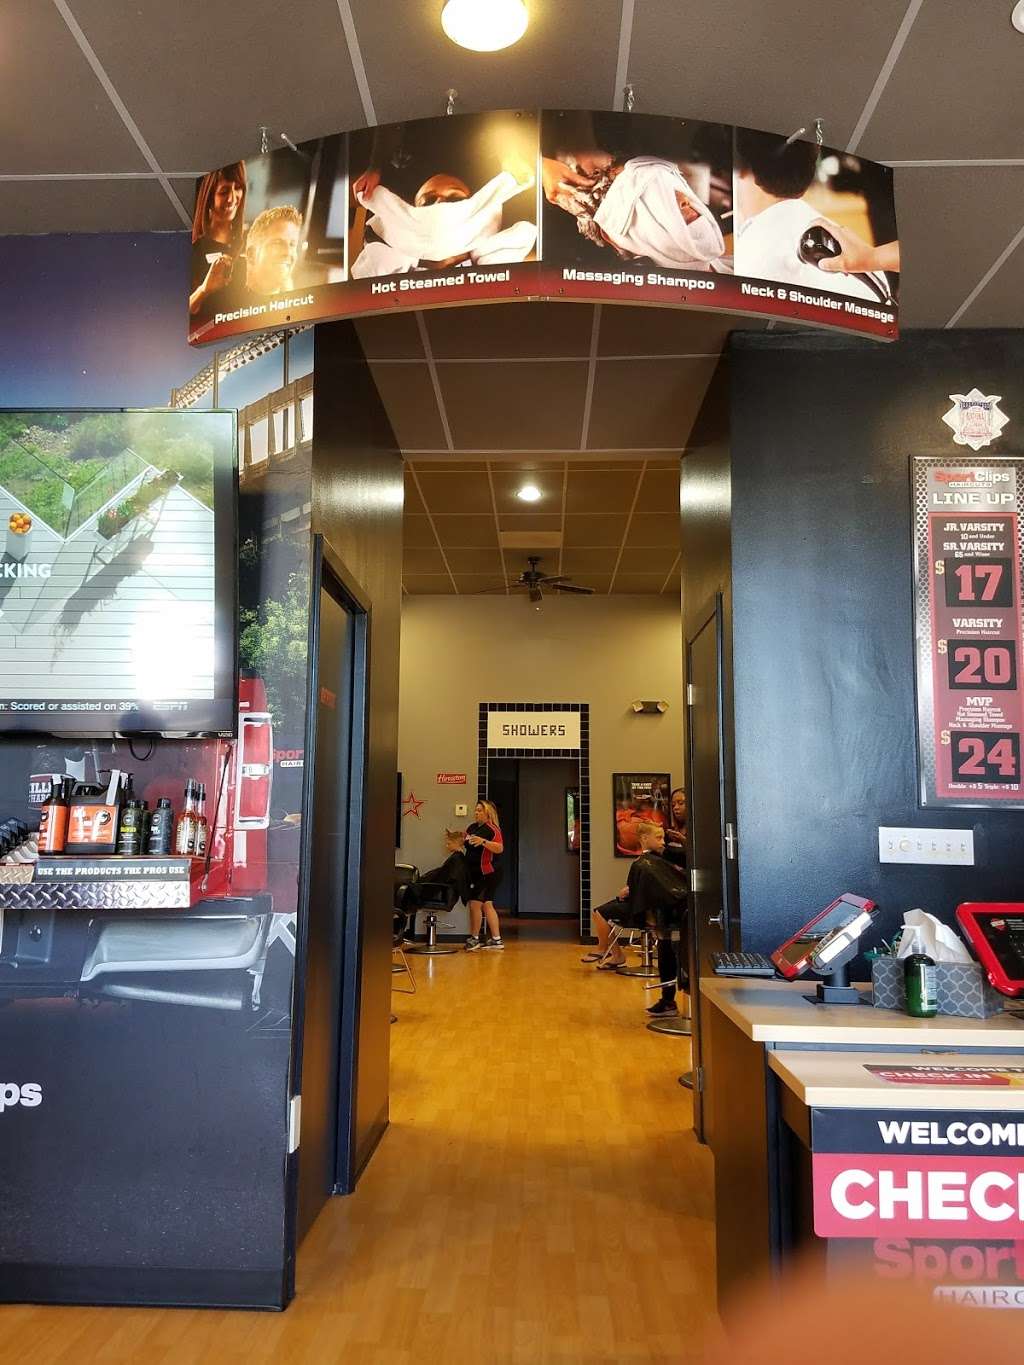 Sport Clips Haircuts of Sienna Plantation | 8840 Hwy 6 Suite 120, Missouri City, TX 77459 | Phone: (281) 778-3870